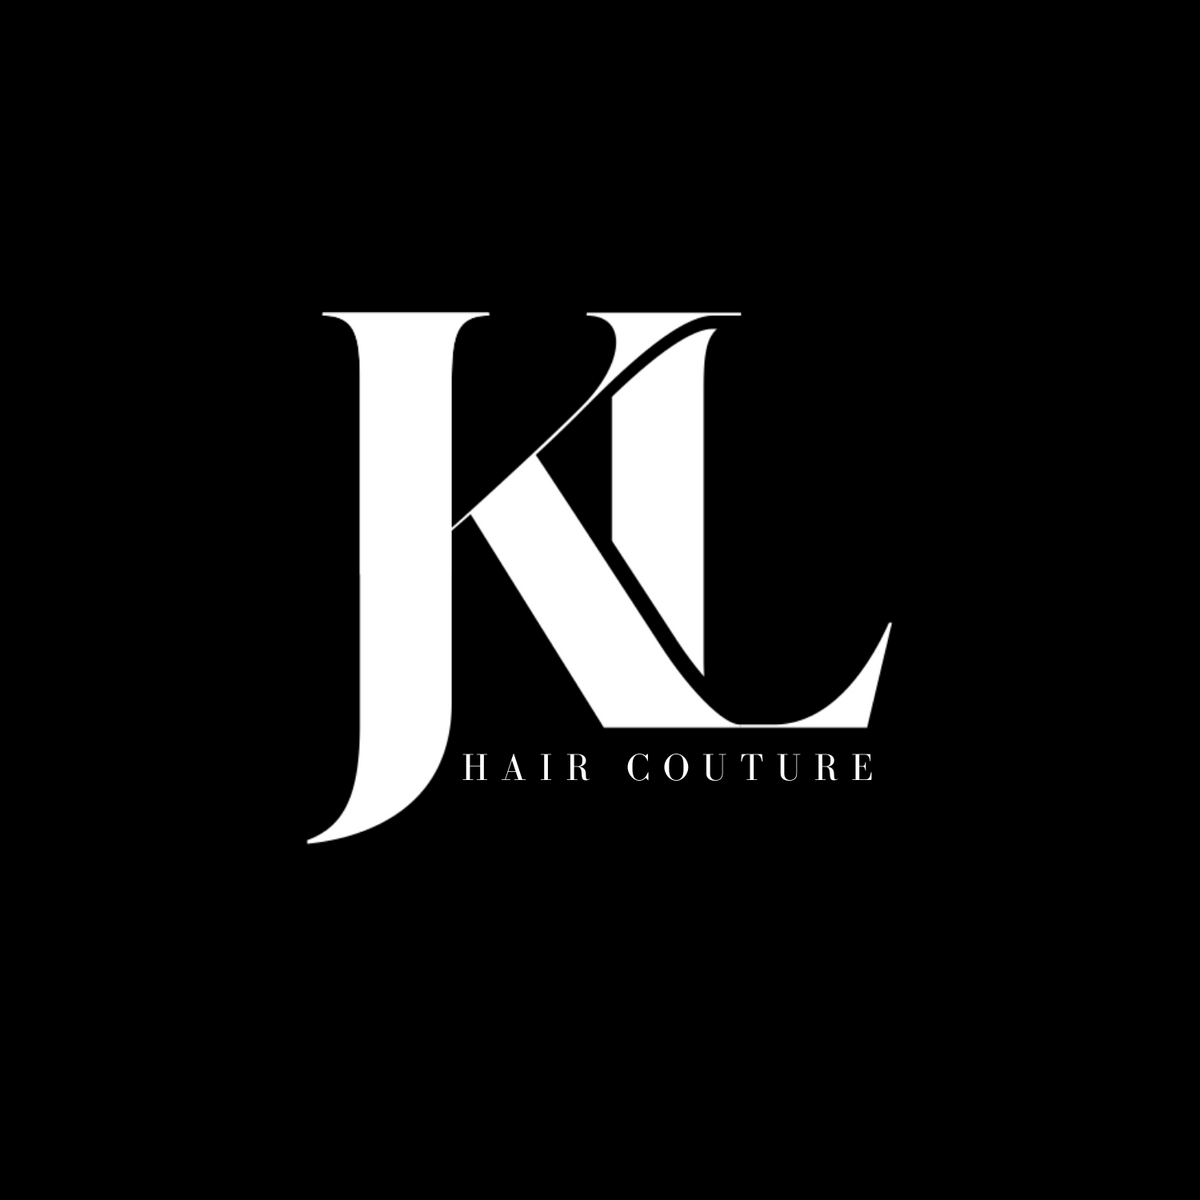 JKL Hair Couture